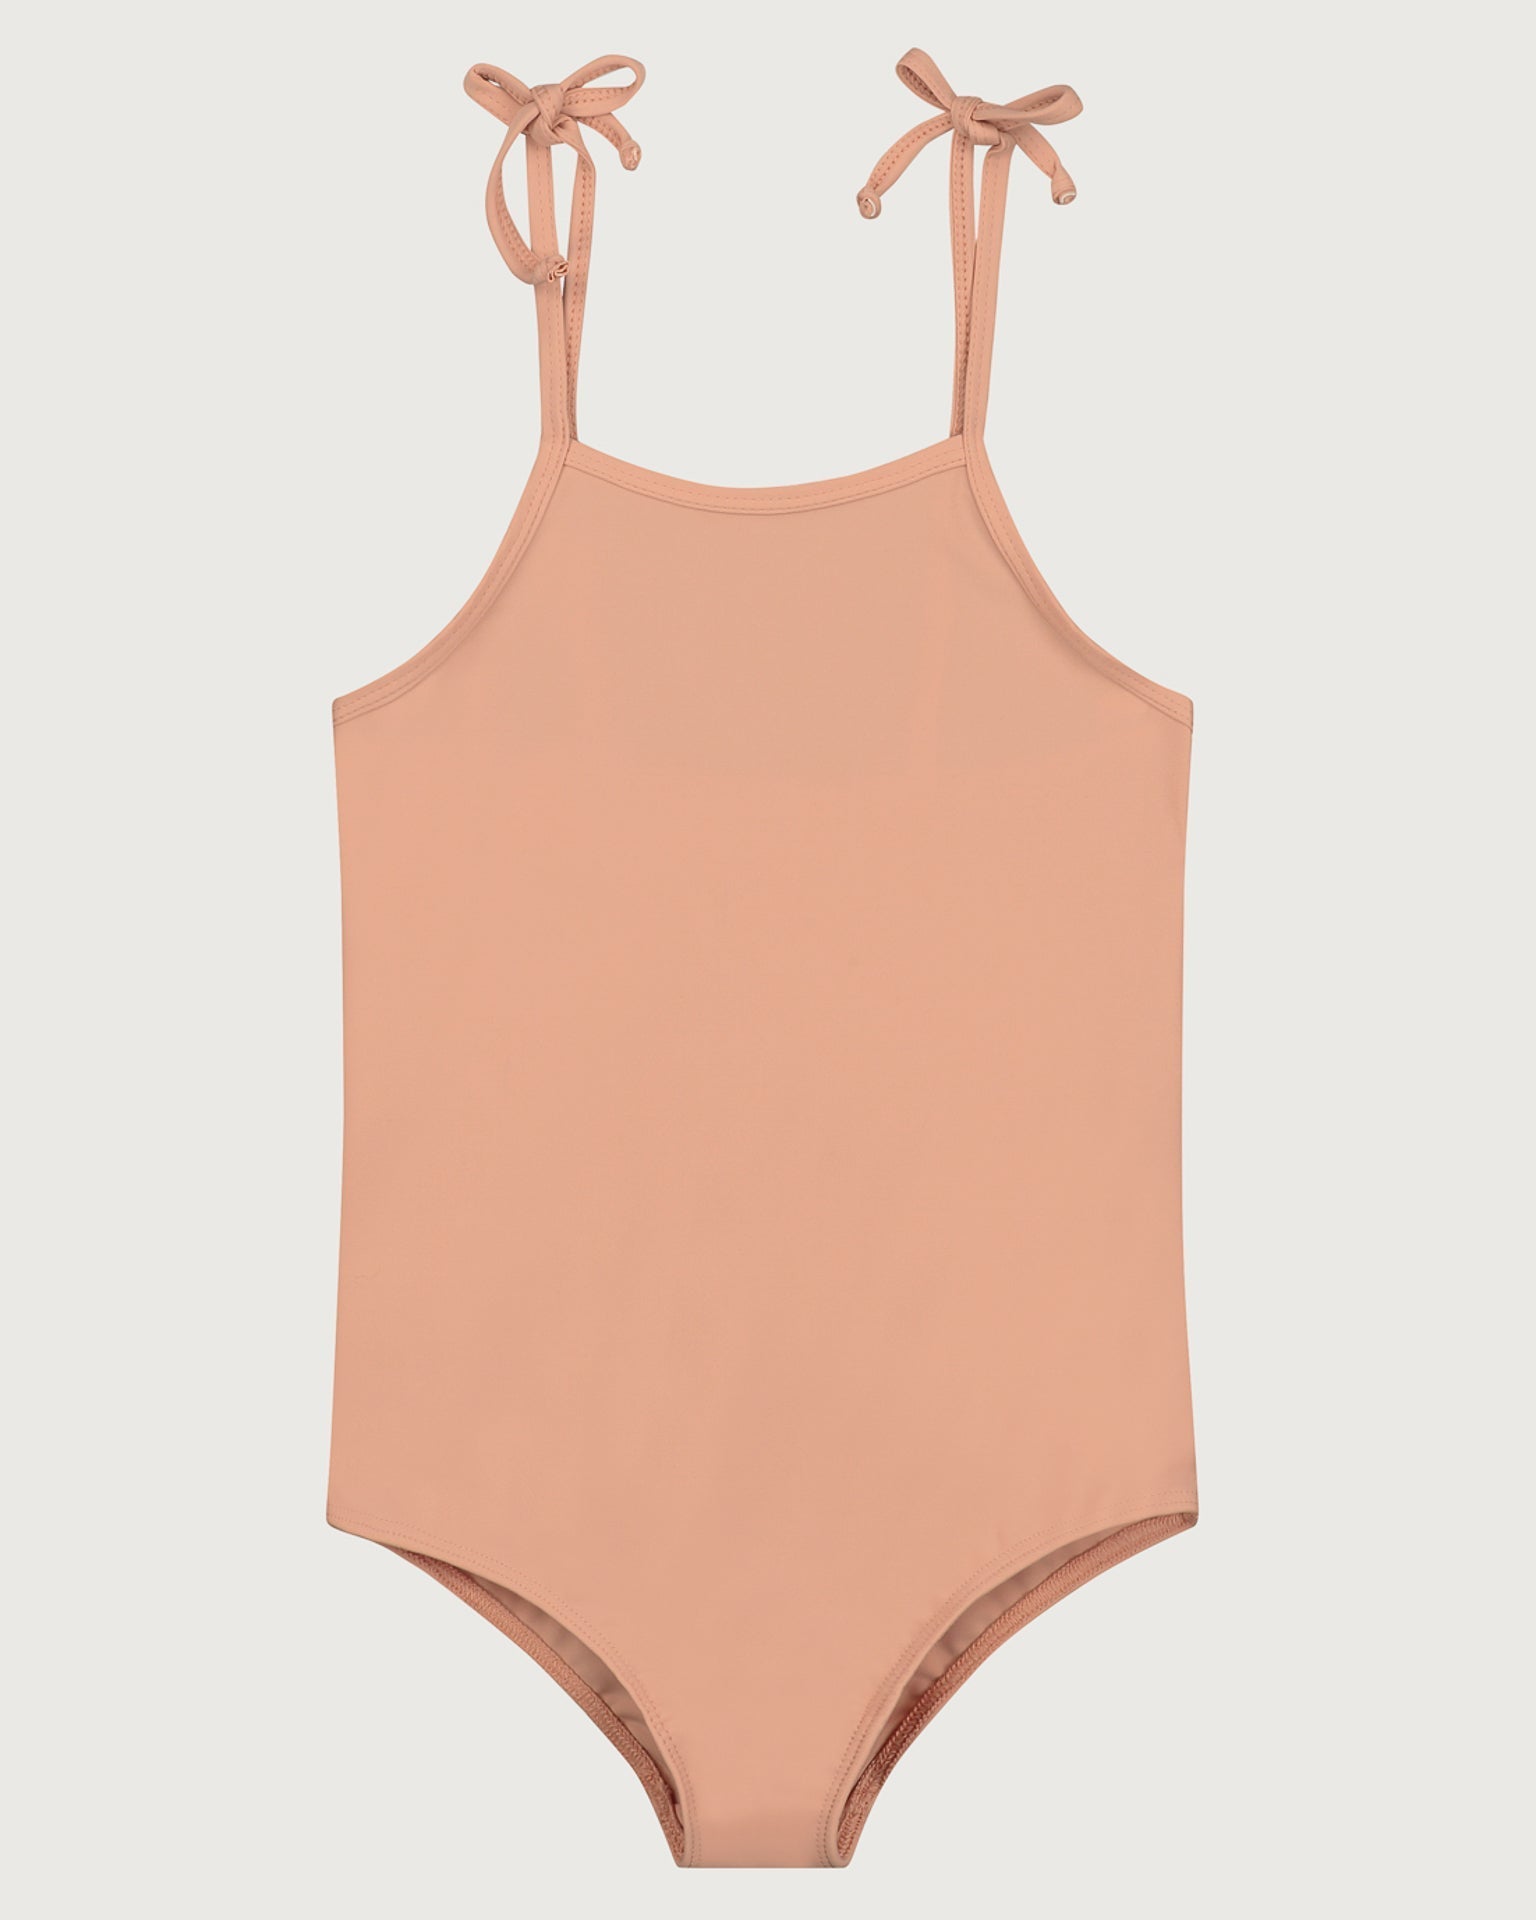 Little gray label girl swimsuit in rustic clay